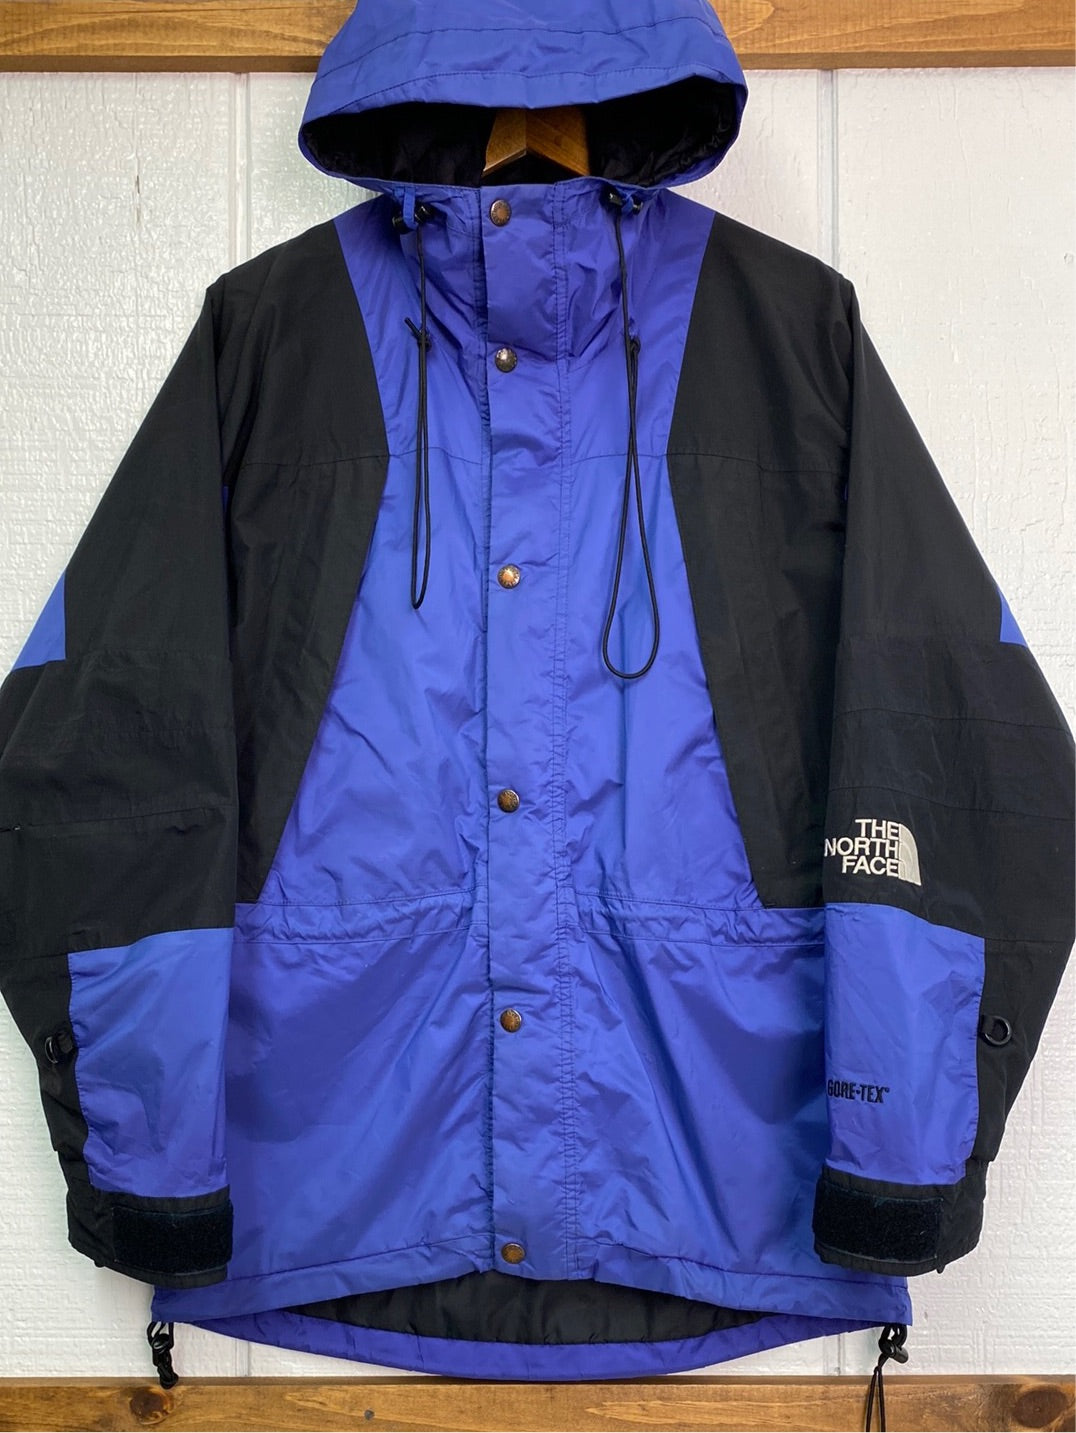 THE NORTH FACE MOUNTAIN LIGHT JACKET